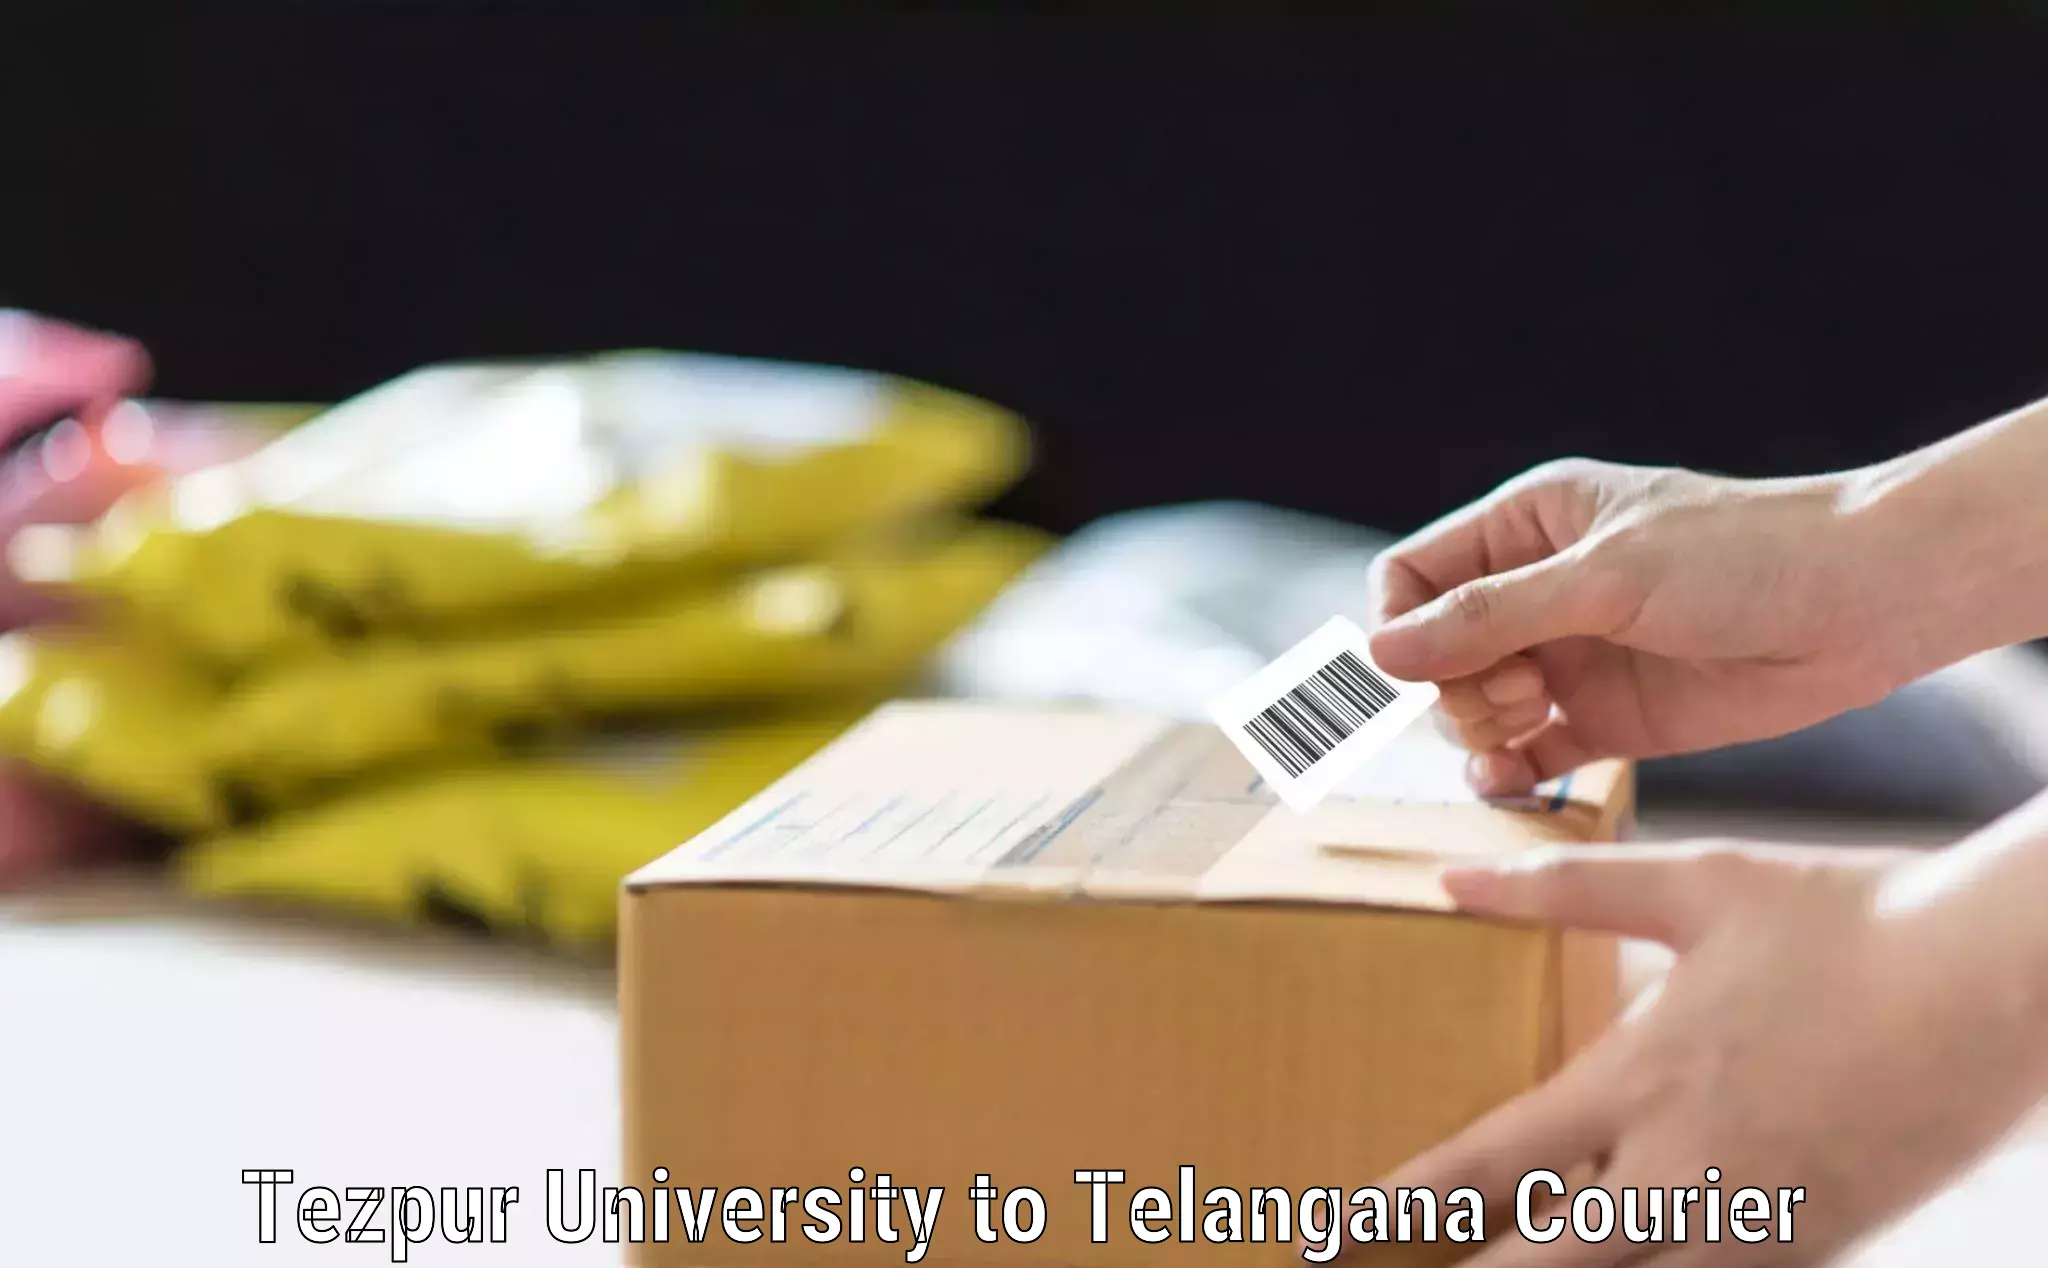 Luggage transfer service in Tezpur University to Khairatabad